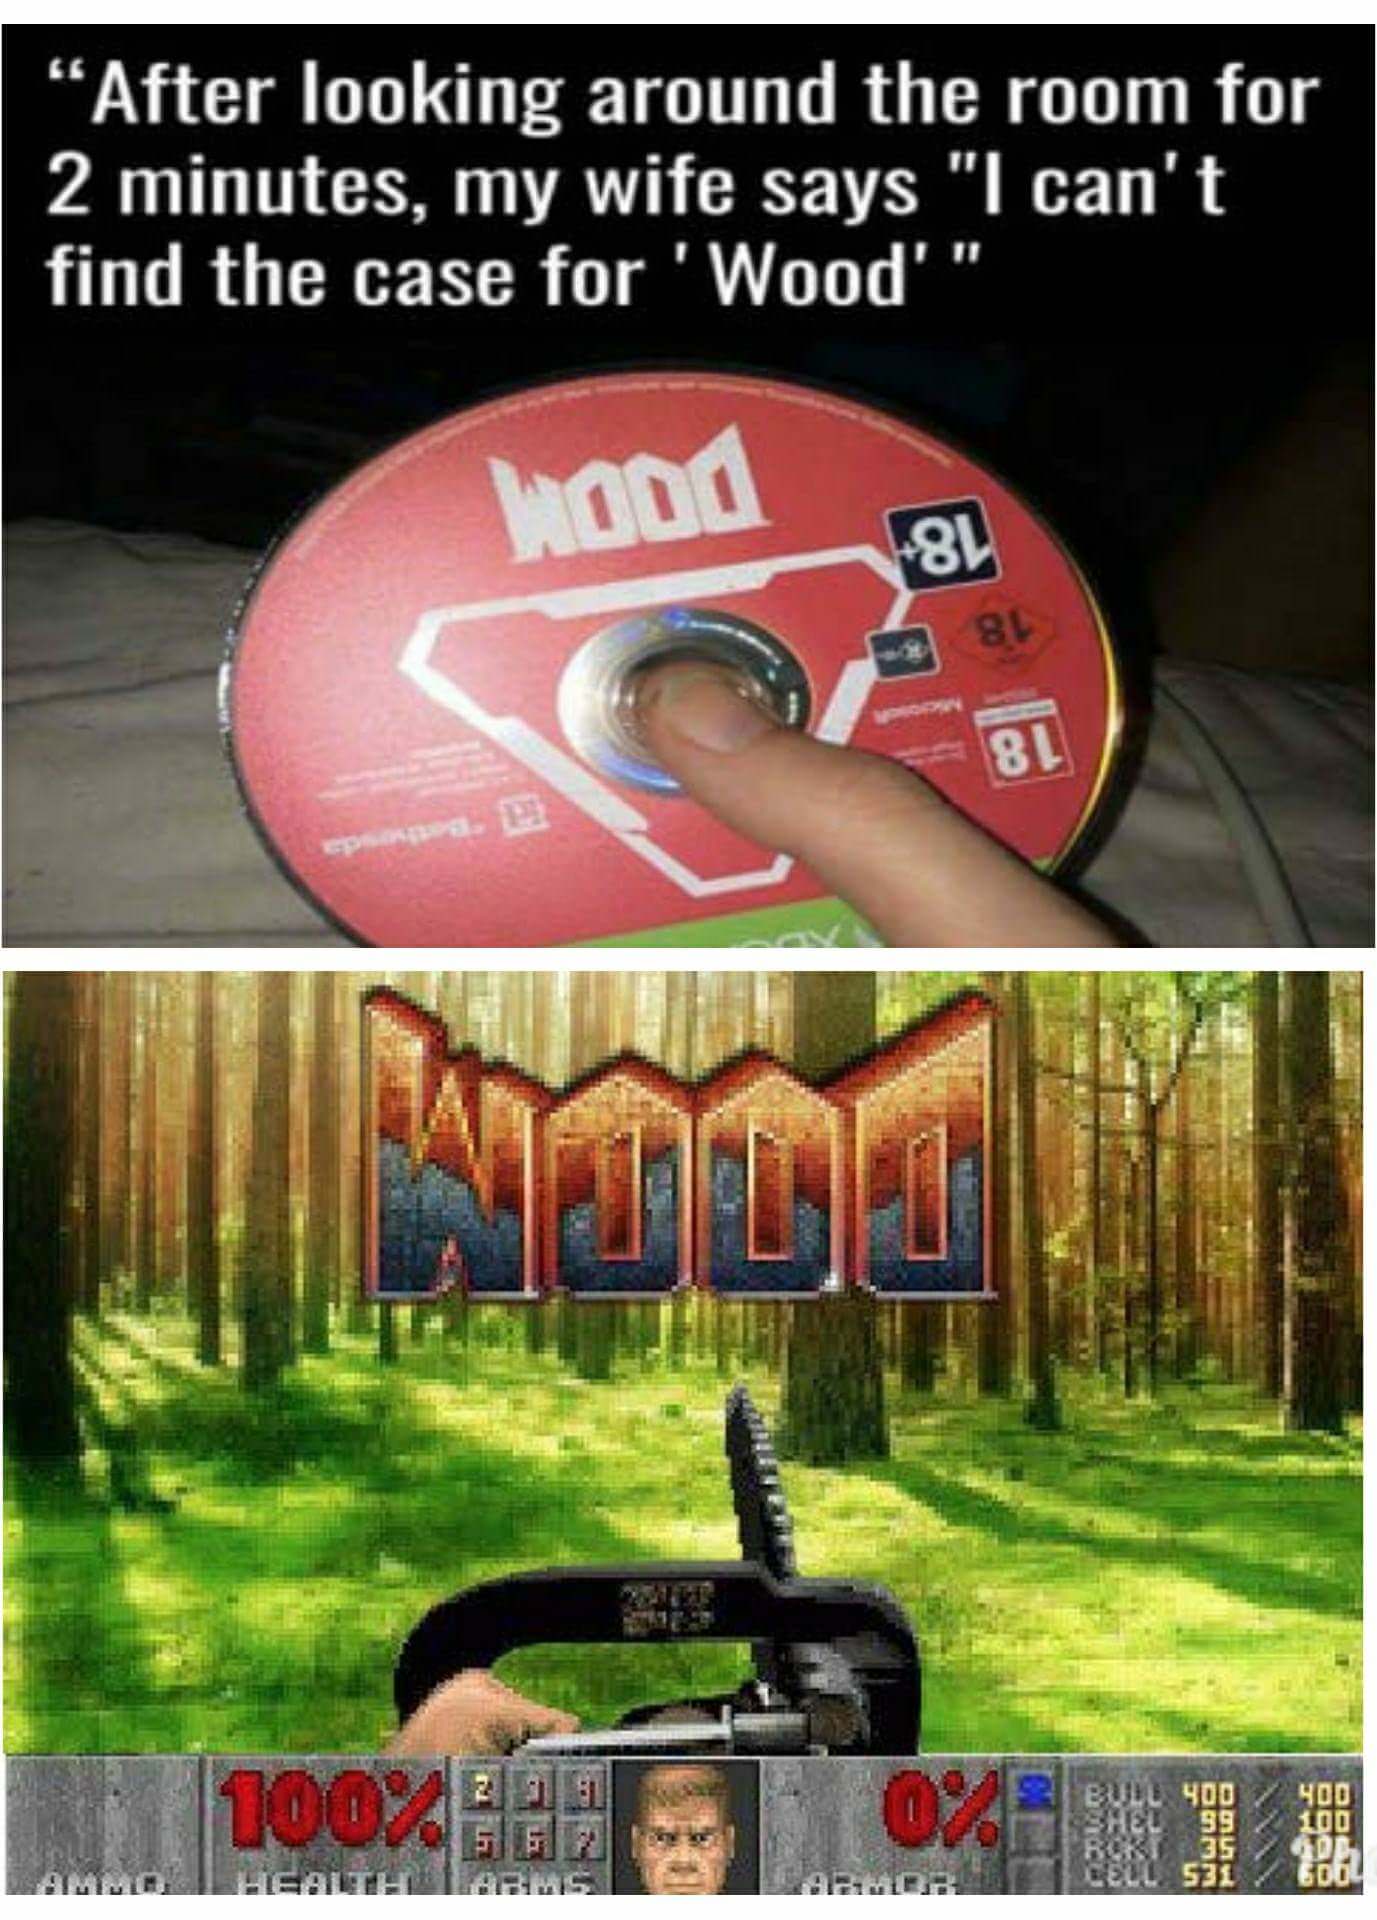 doom wood meme - "After looking around the room for 2 minutes, my wife says "I can't find the case for 'Wood'" Hod 100% 900 39 00